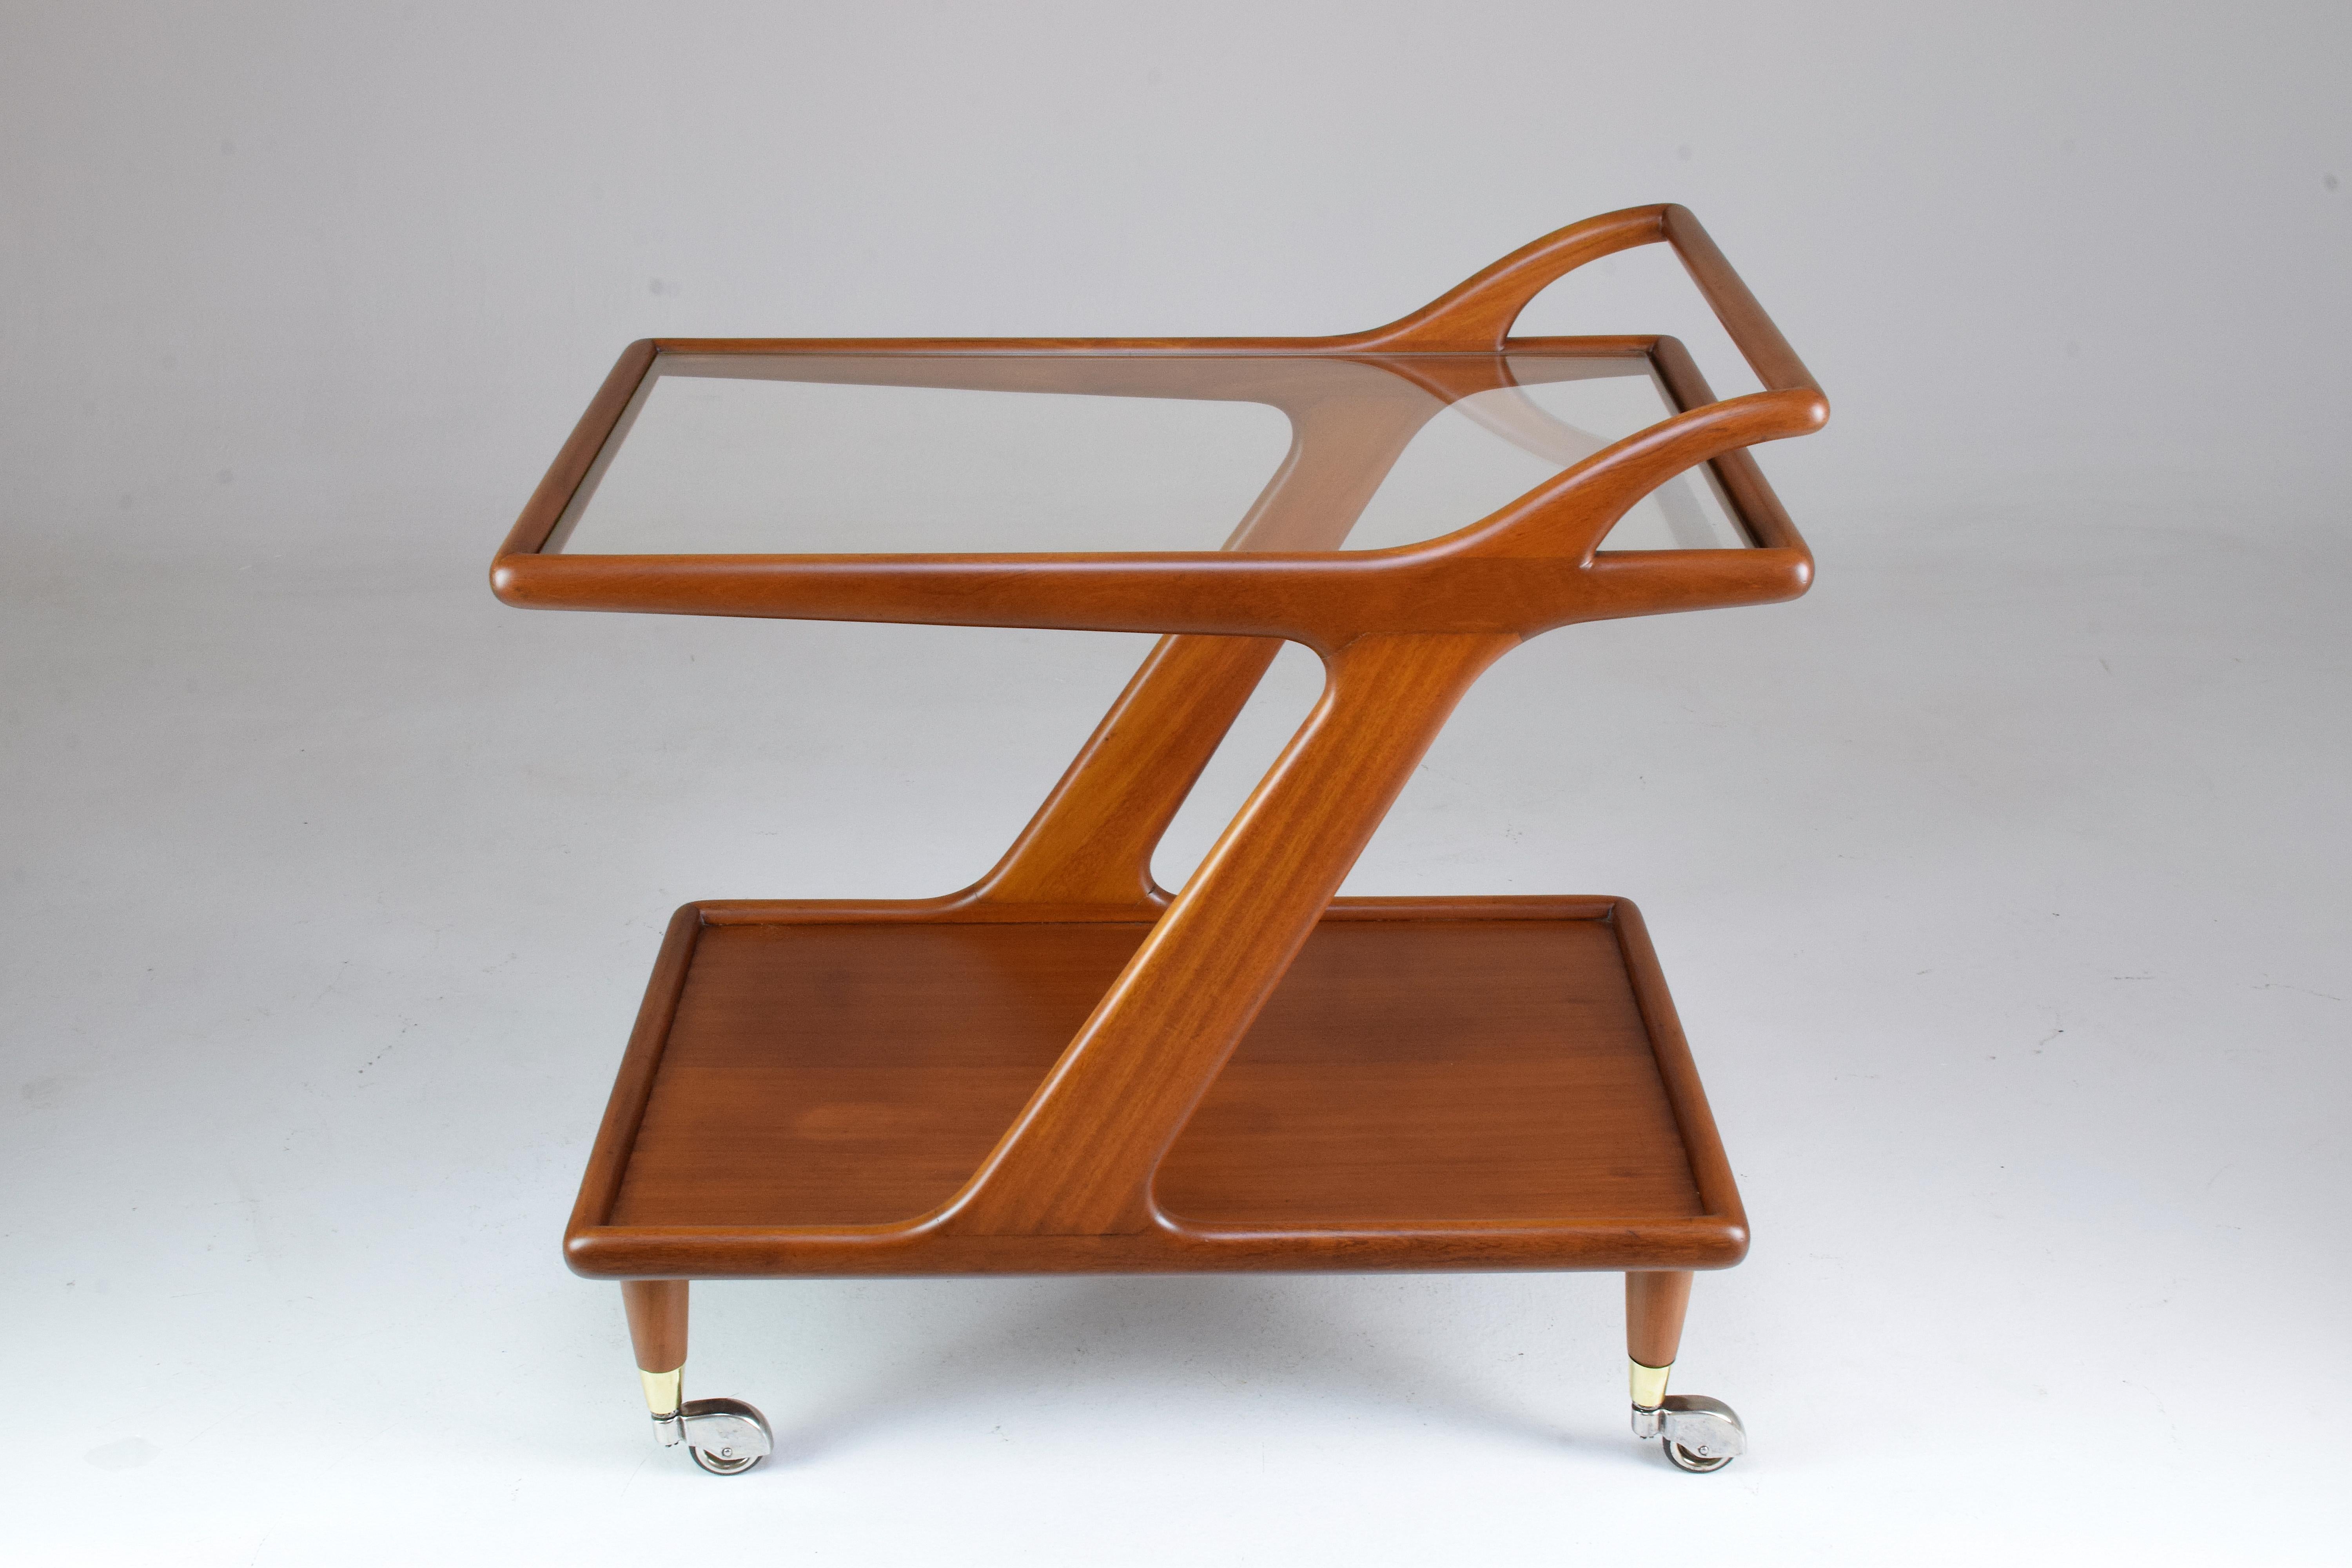 A 20th century two-tier bar or serving cart on its original rollers with glass tabletop and light walnut structure with a curved handle typical of the Italian design period.
Italy, circa 1950s. 

All our pieces are fully restored at our atelier